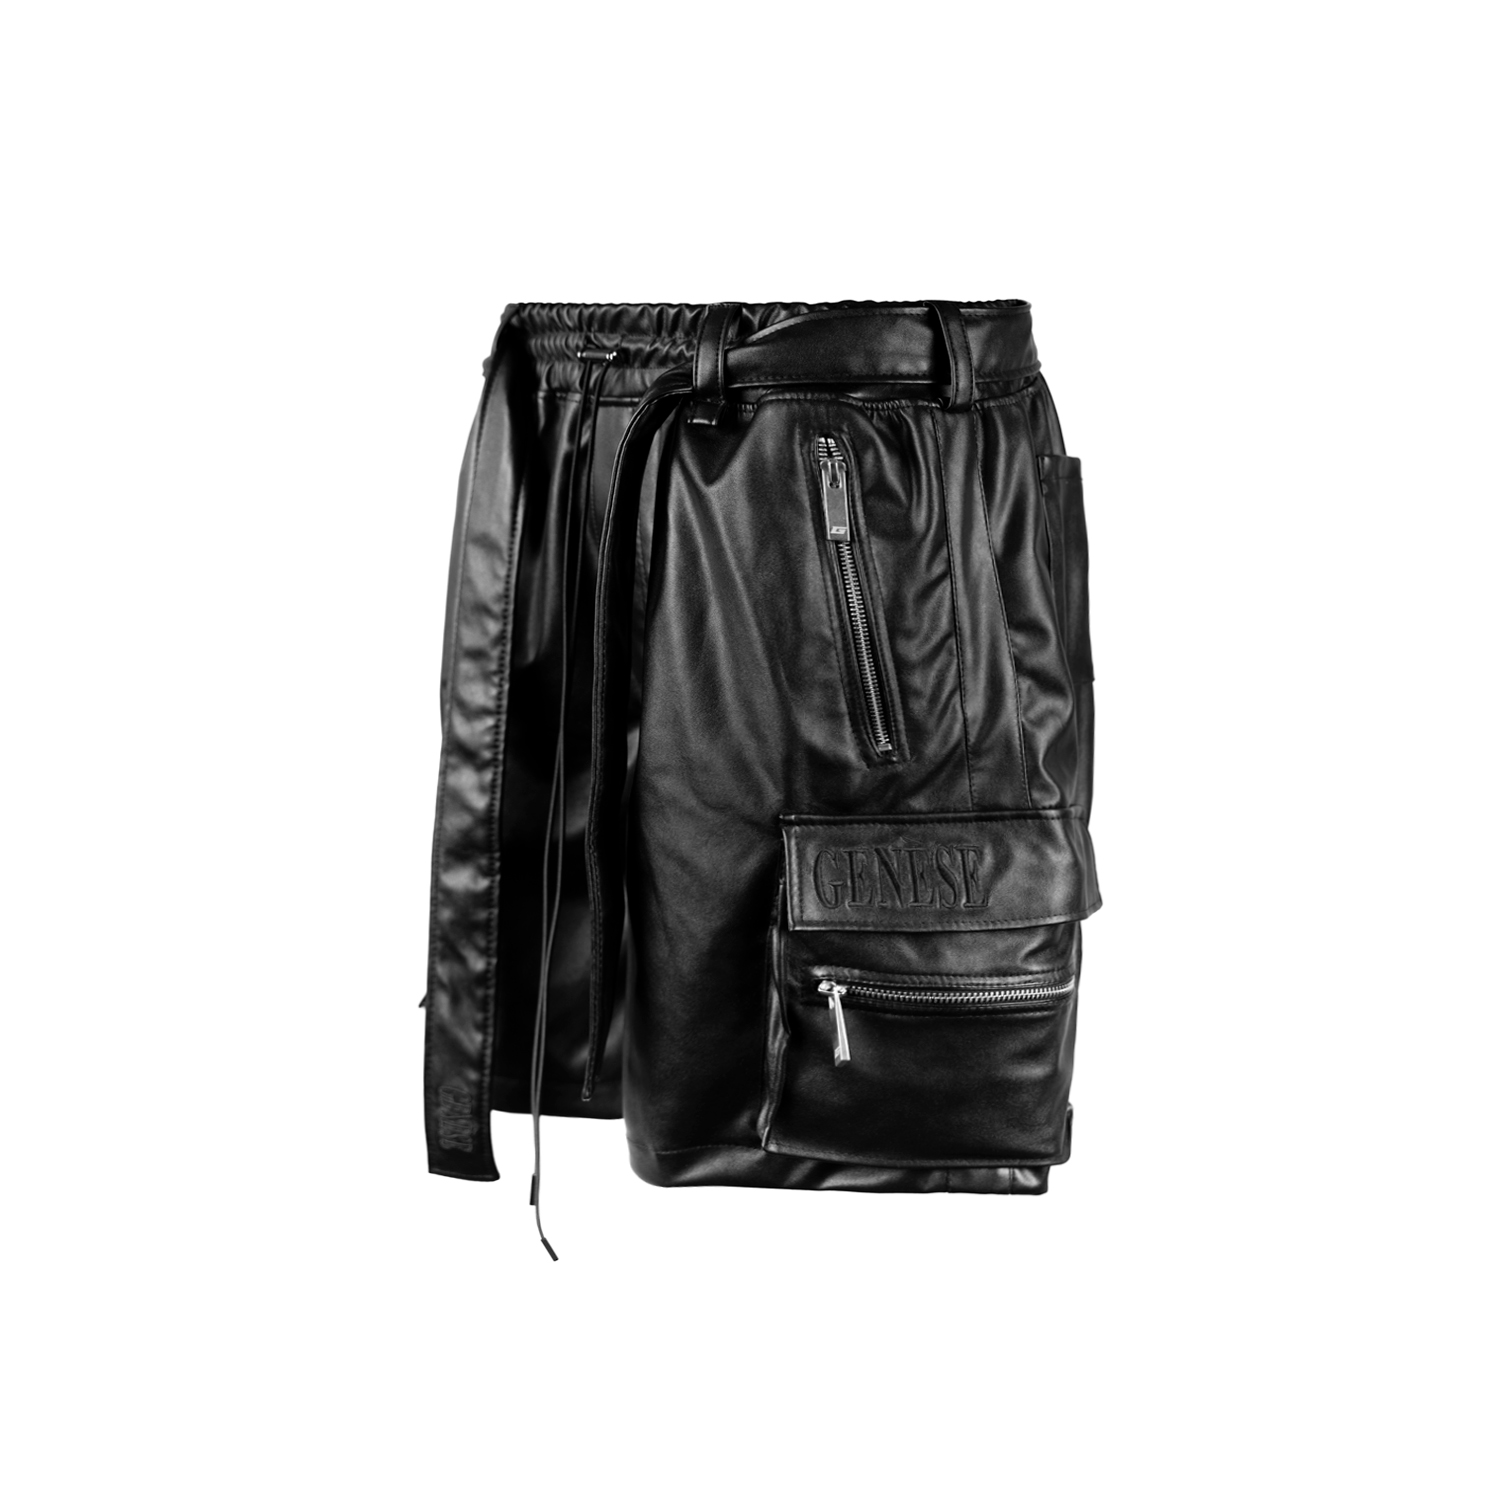 leather_black_panther_shorts_1500x1500_04